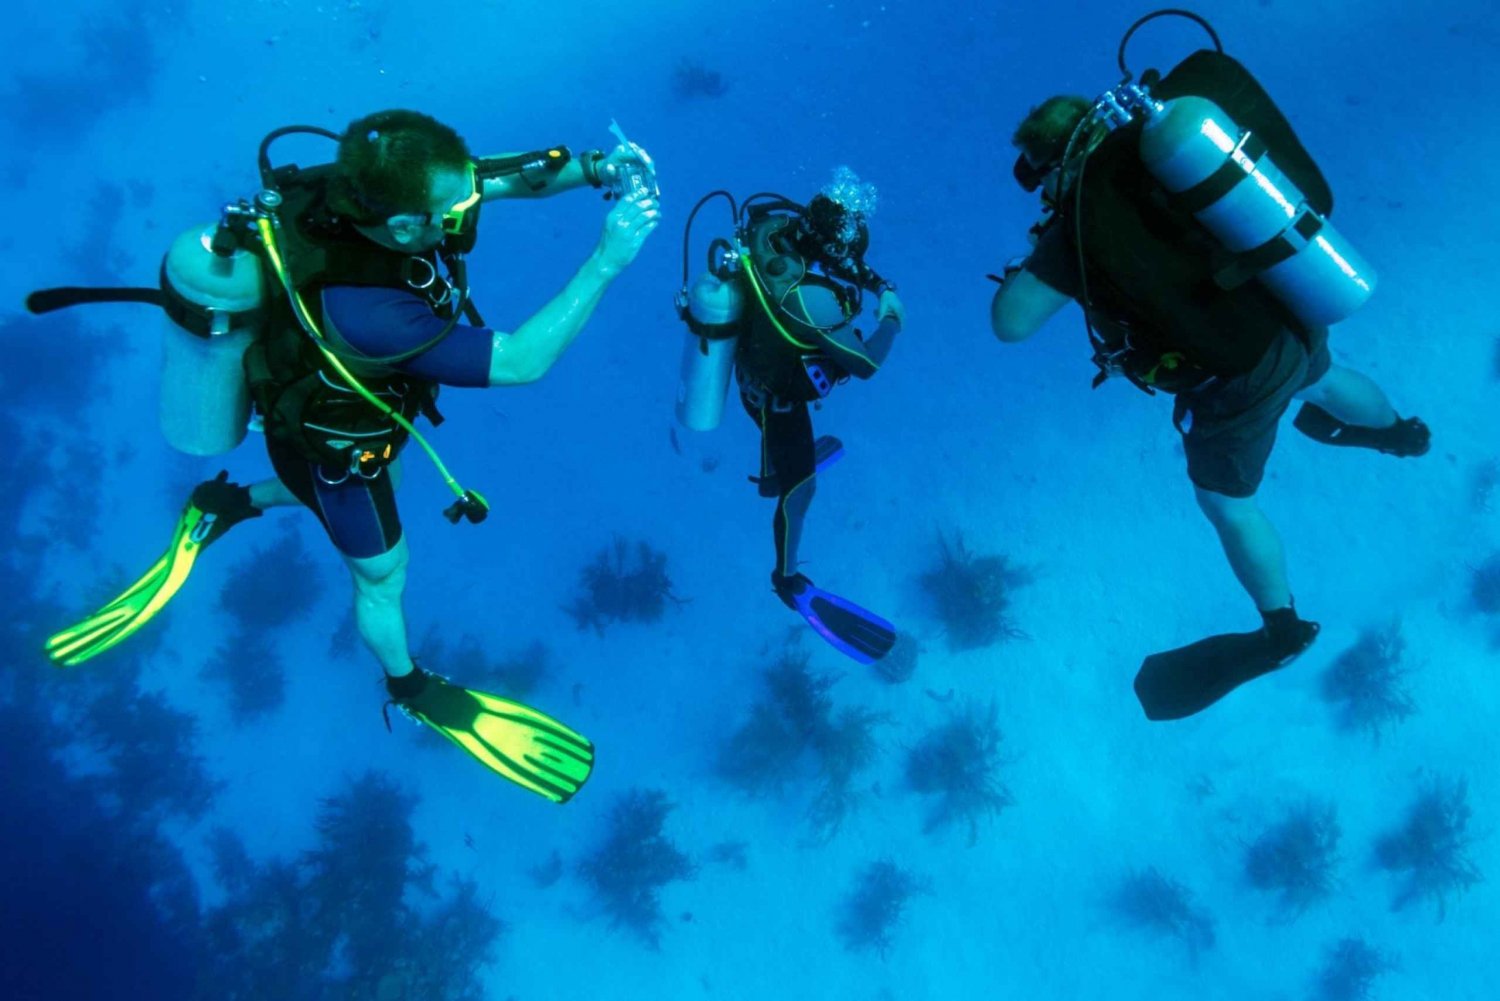 From Bodrum: Scuba Diving in the Aegean Sea